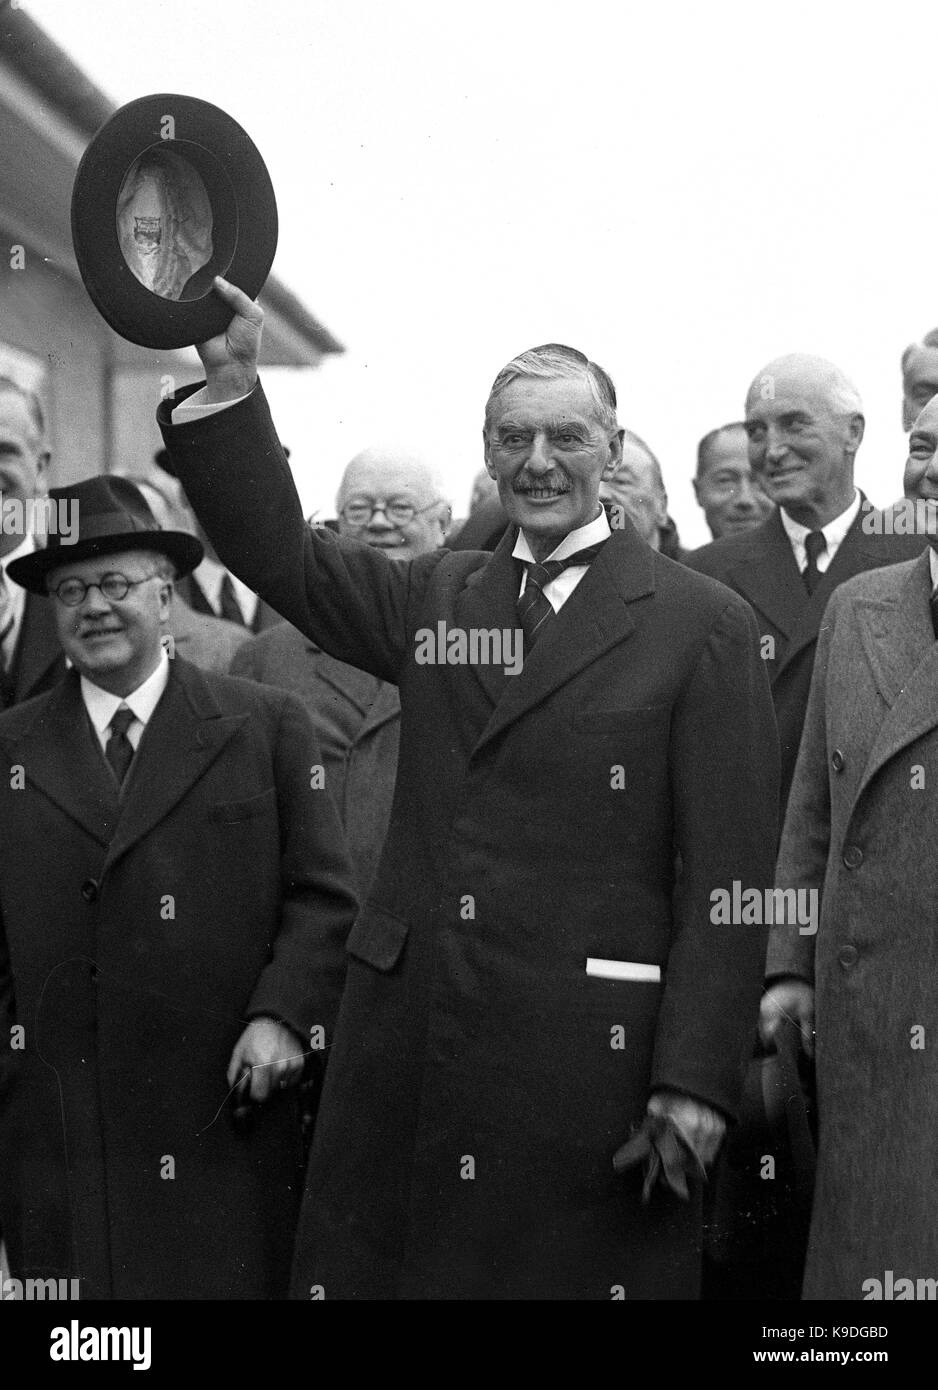 British prime minister Neville Chamberlain after returning from his summit meeting with the German Chancellor Adolf Hitler in Munich. Prime Minster Chamberlain returned with the paper signed by Hitler and himself sticking out of his pocket after declaring to the waiting crowd ' Peace in our time ' 3rd October 1938. With him is Sir Kingsley Wood Stock Photo